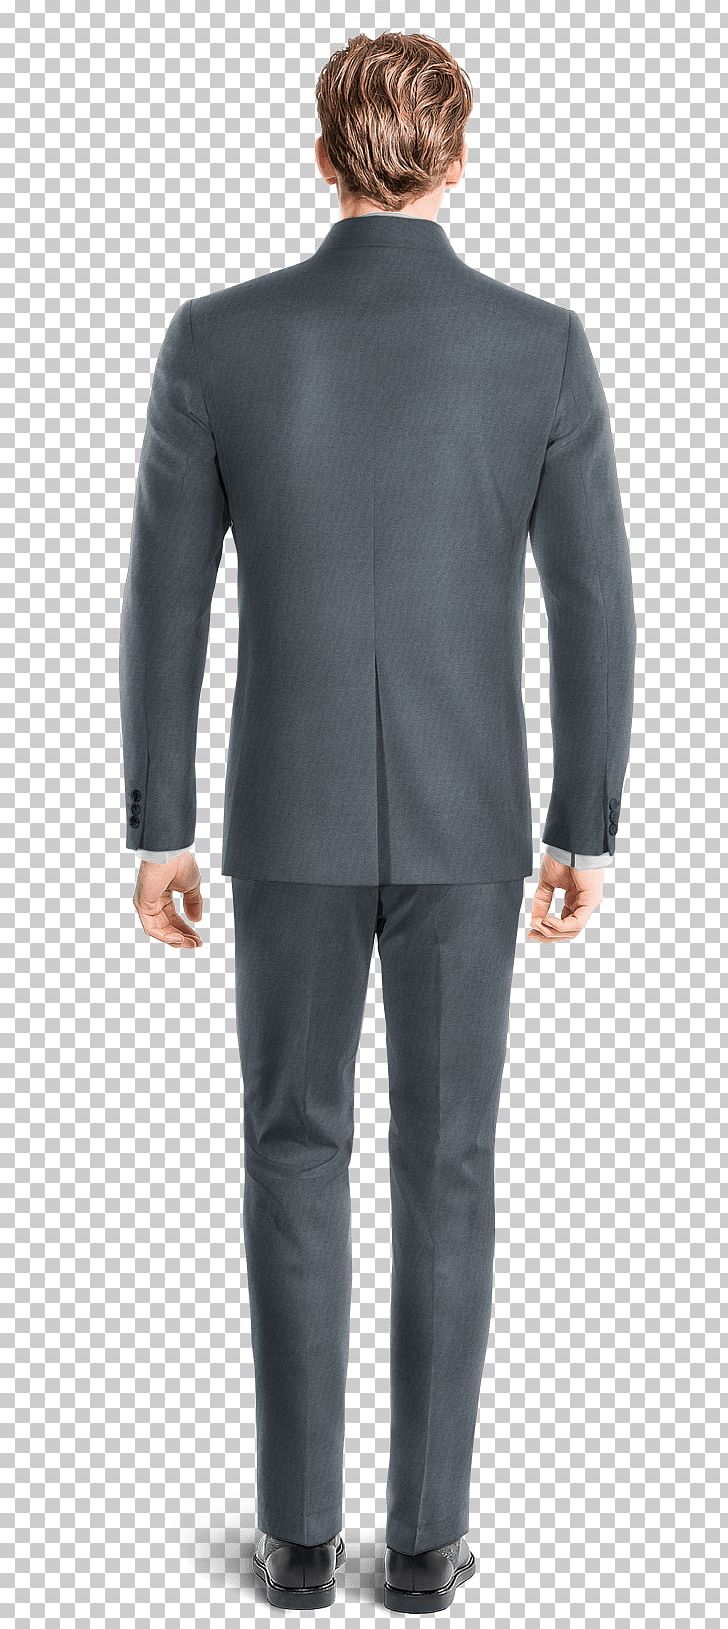 Tuxedo Suit Double-breasted Wool Coat PNG, Clipart,  Free PNG Download